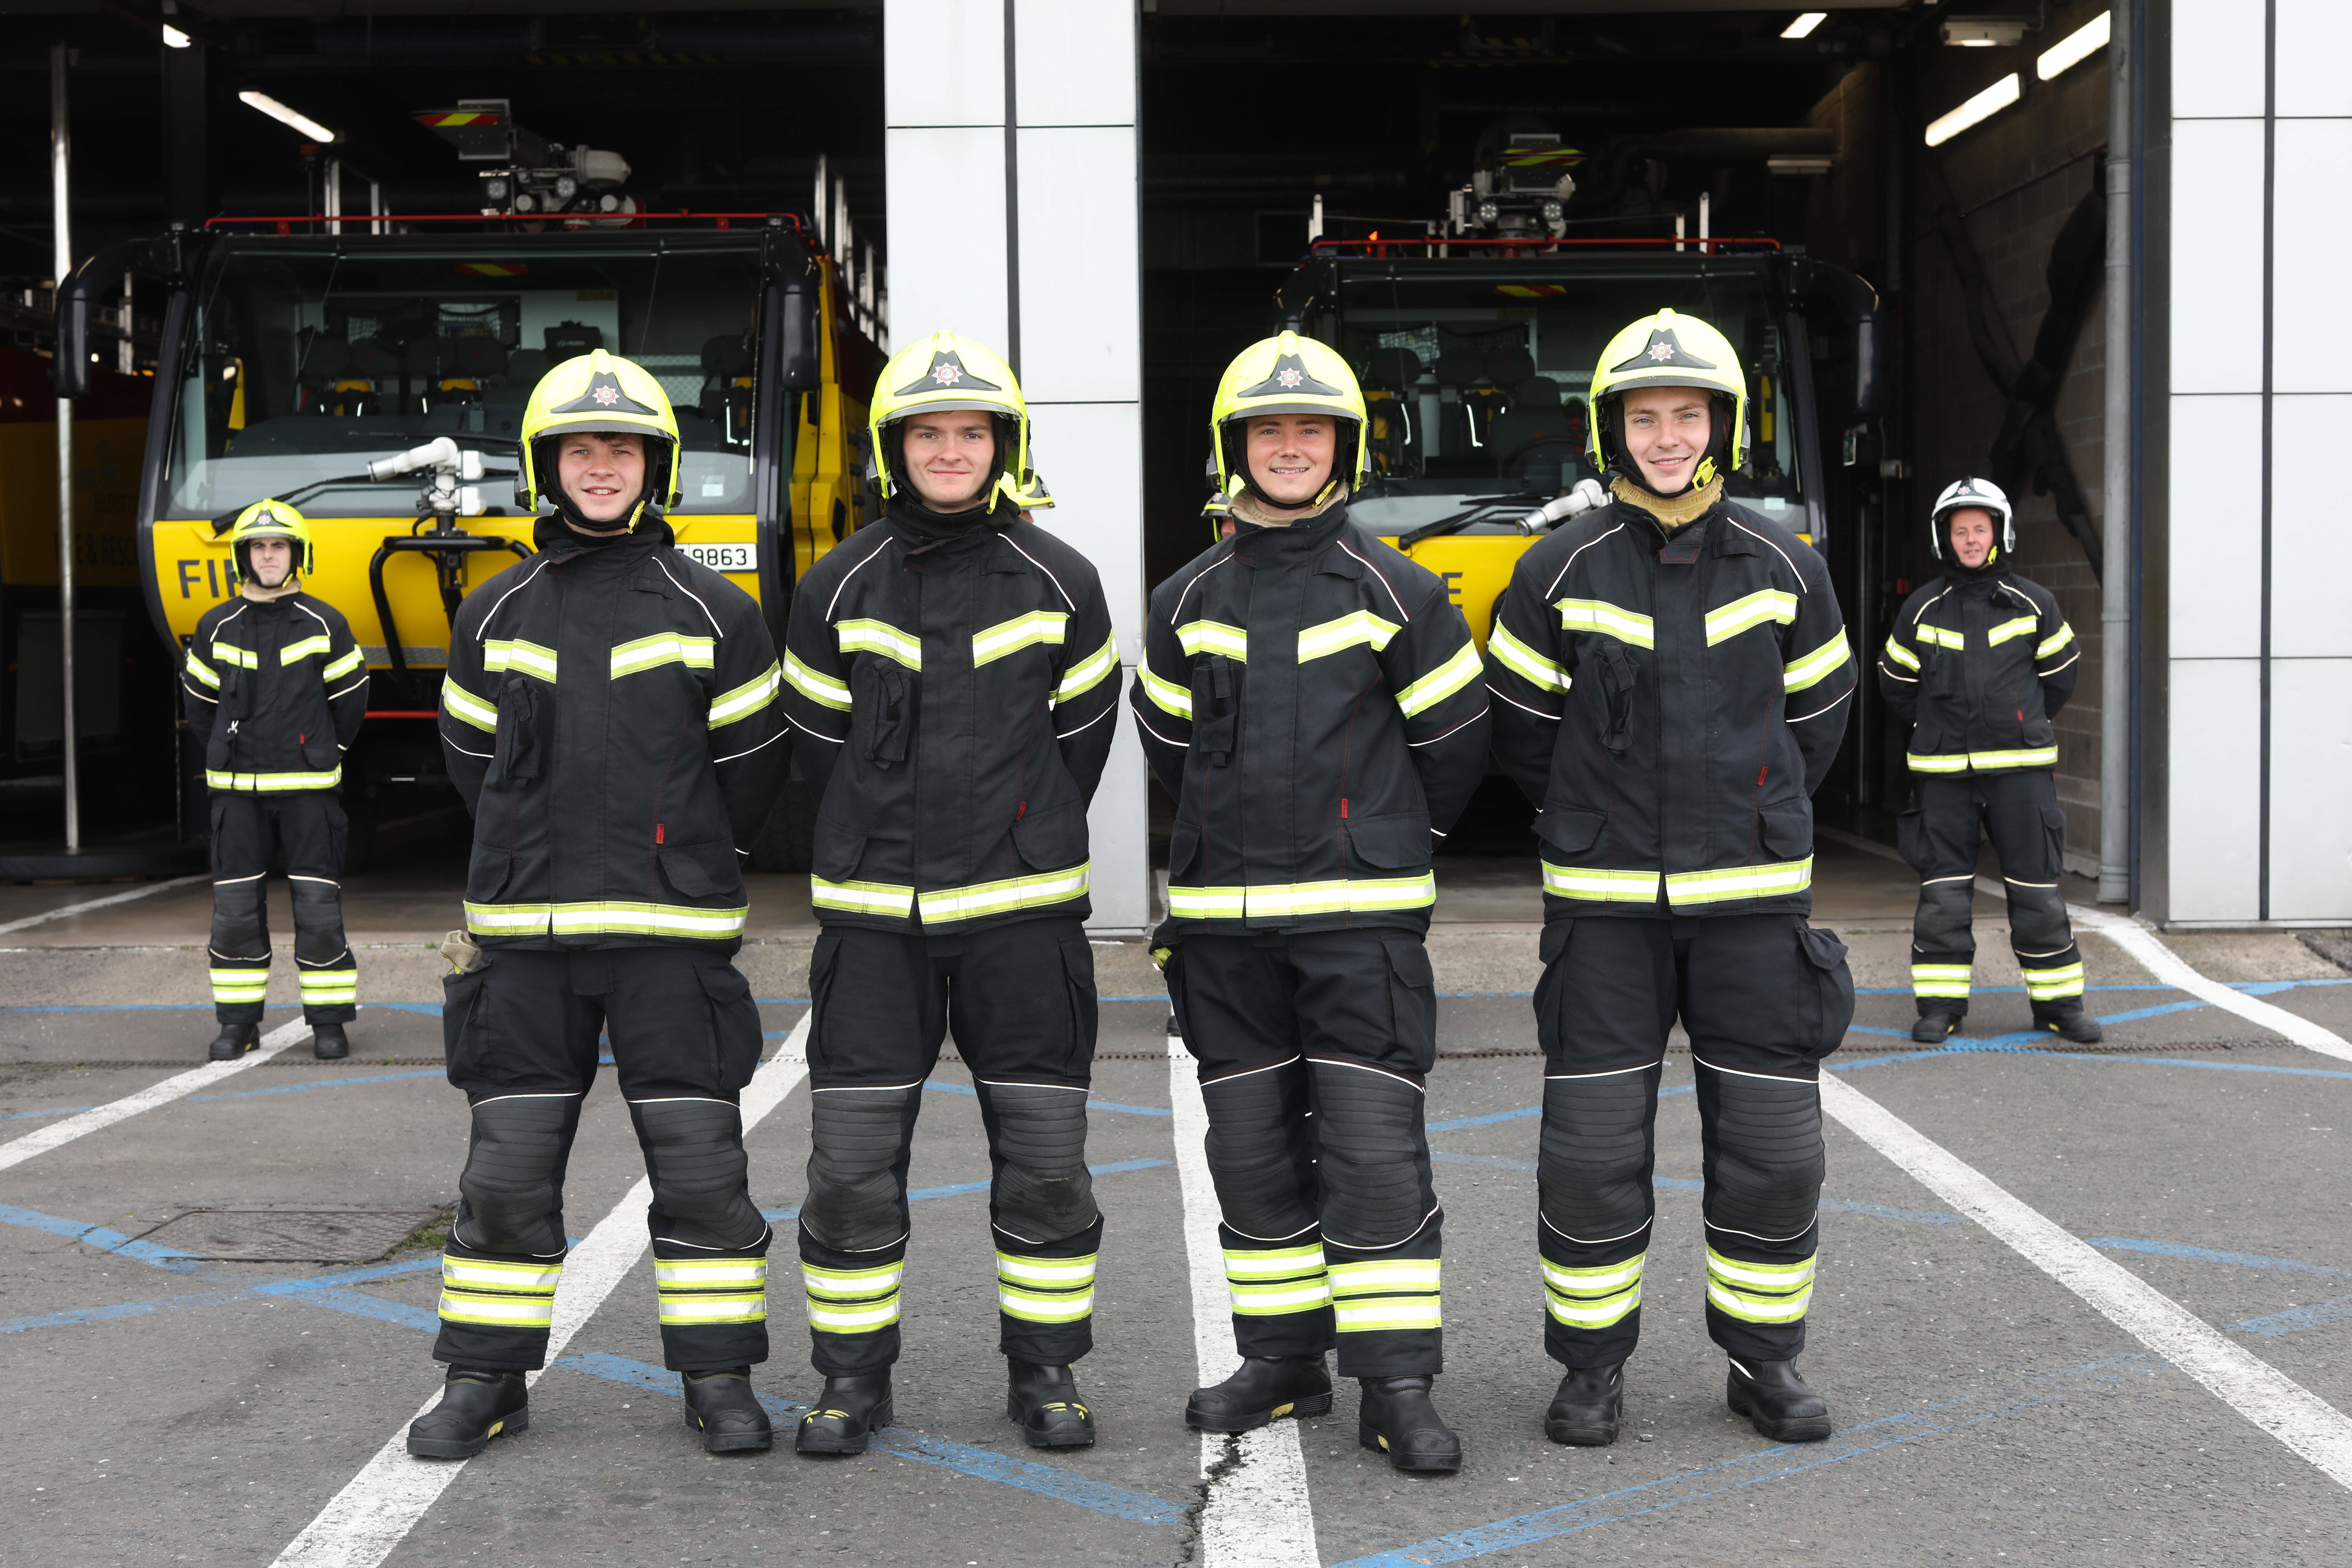 Four firefighting apprentices celebrate their graduation from Belfast City Airport's High Flyer's Apprenticeship Programme